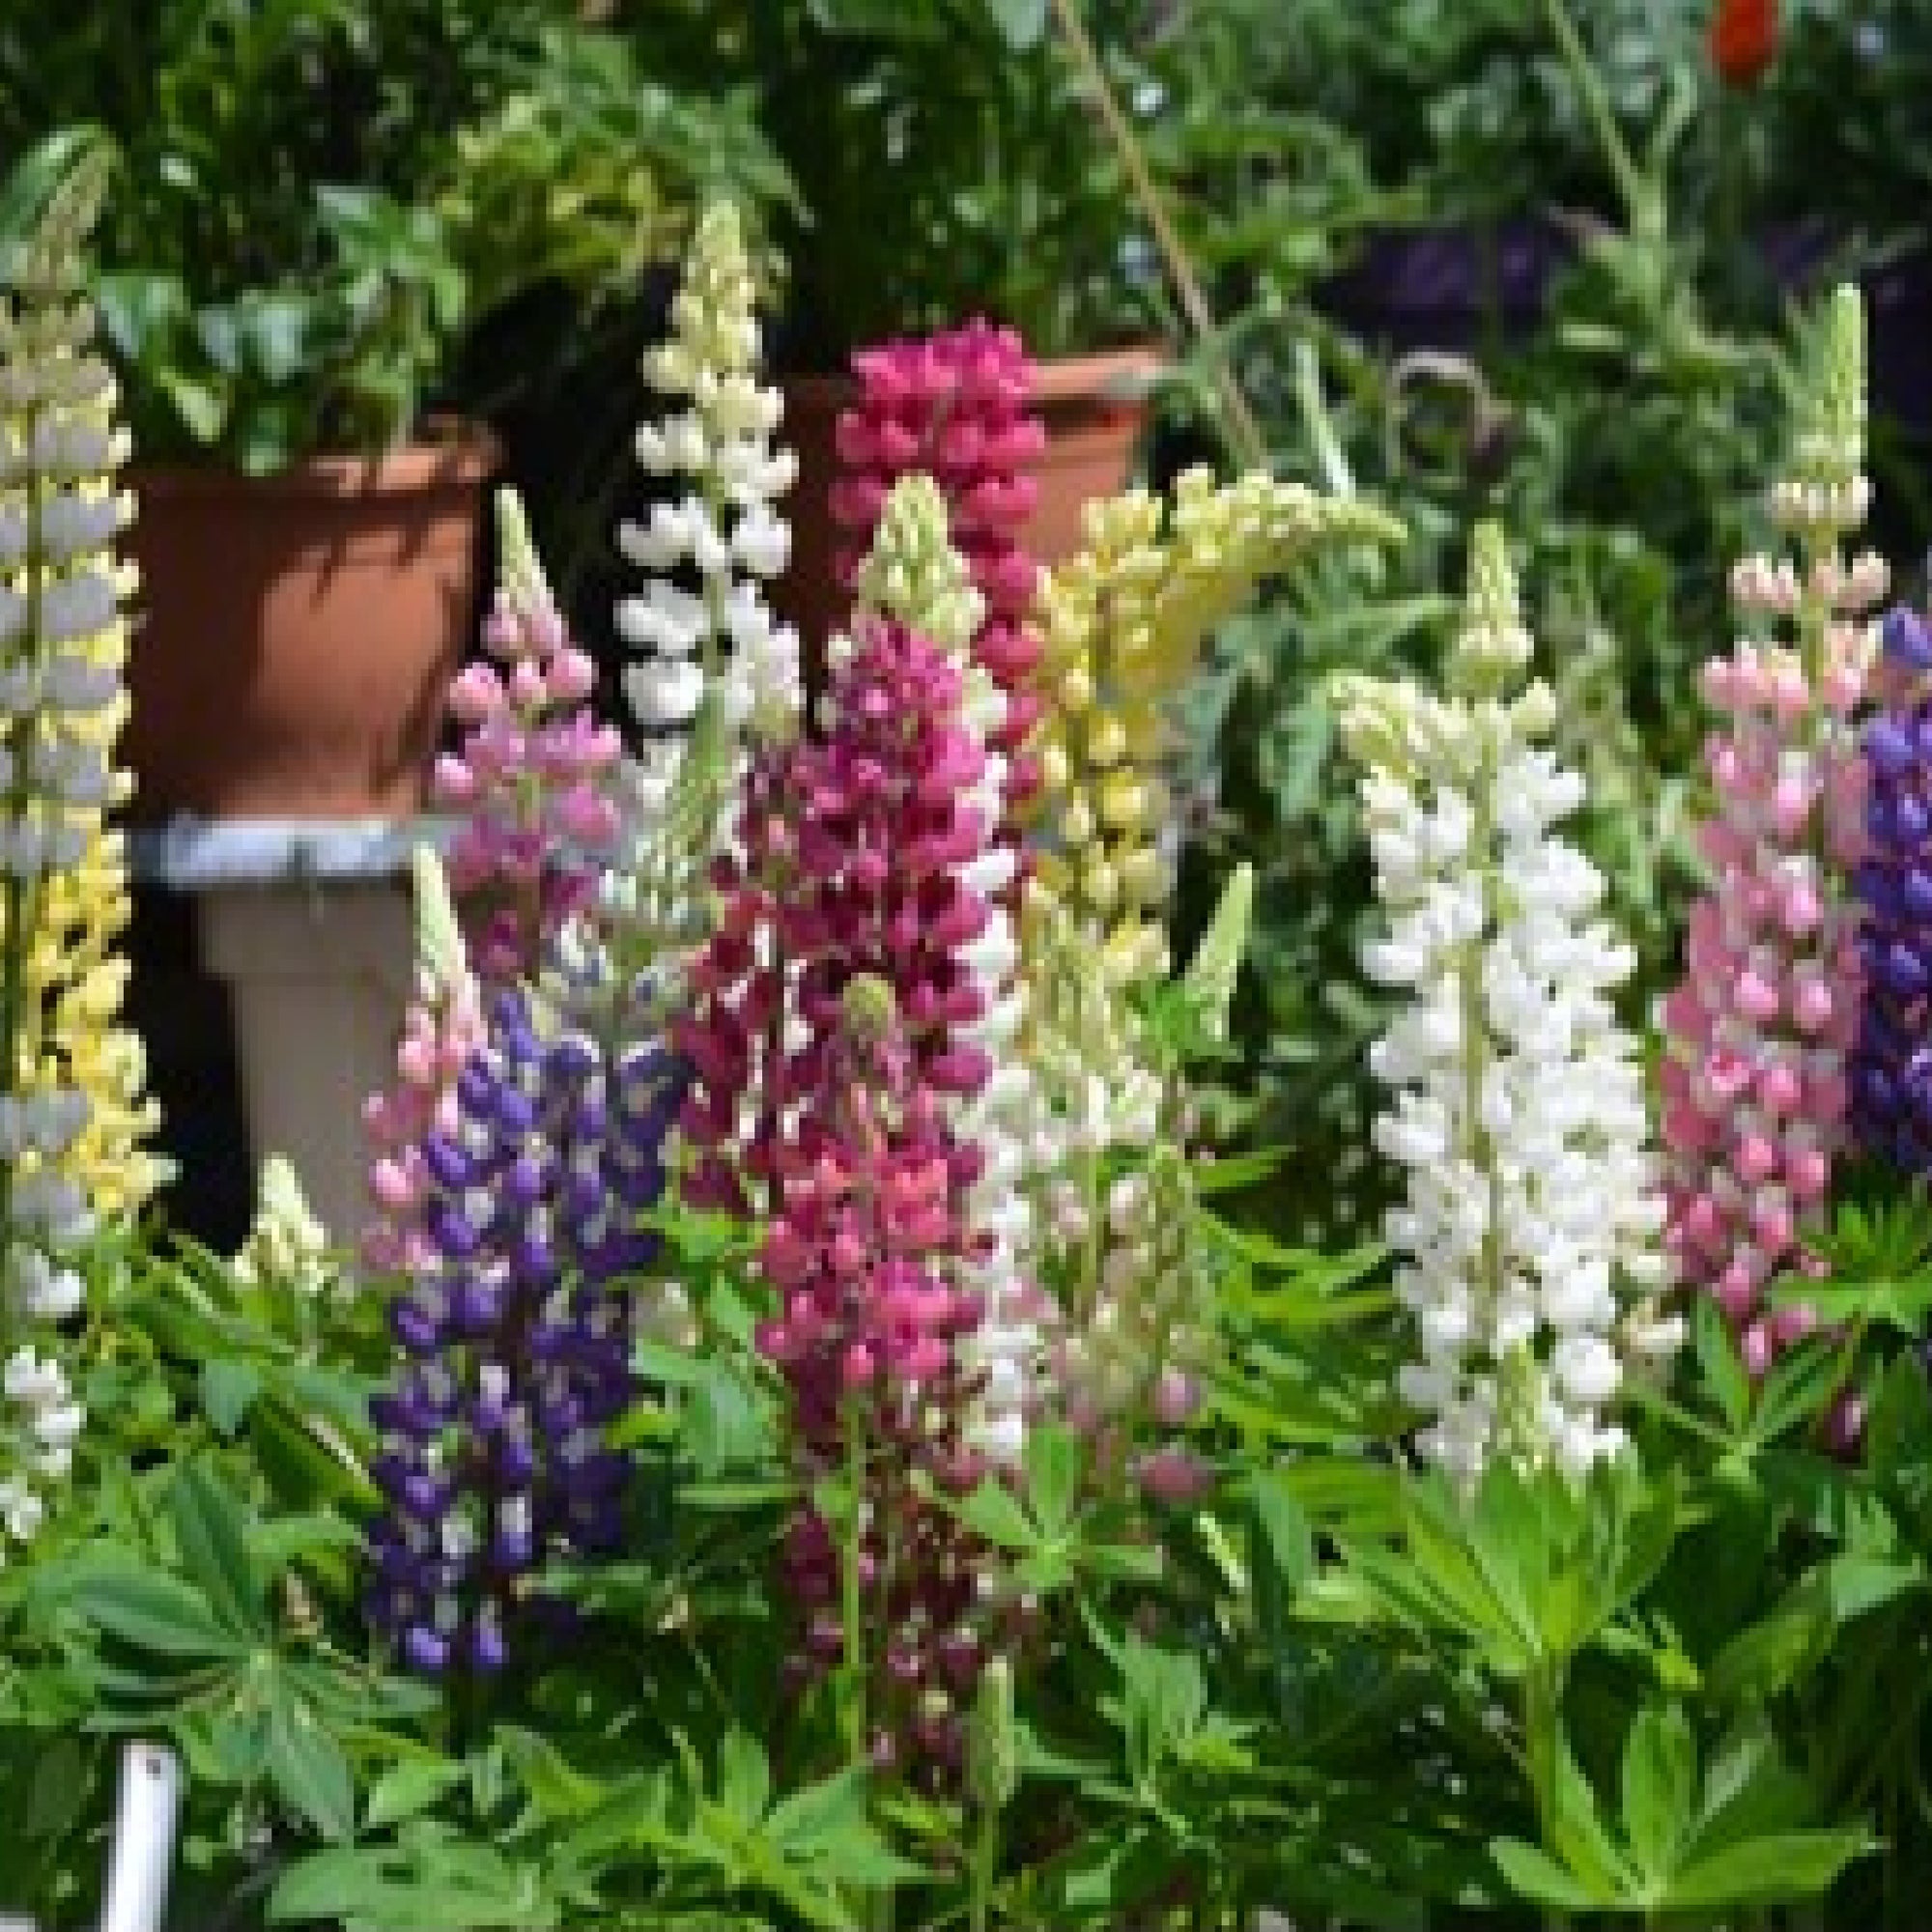 Lupin Russel hybrids Mixed 9cm